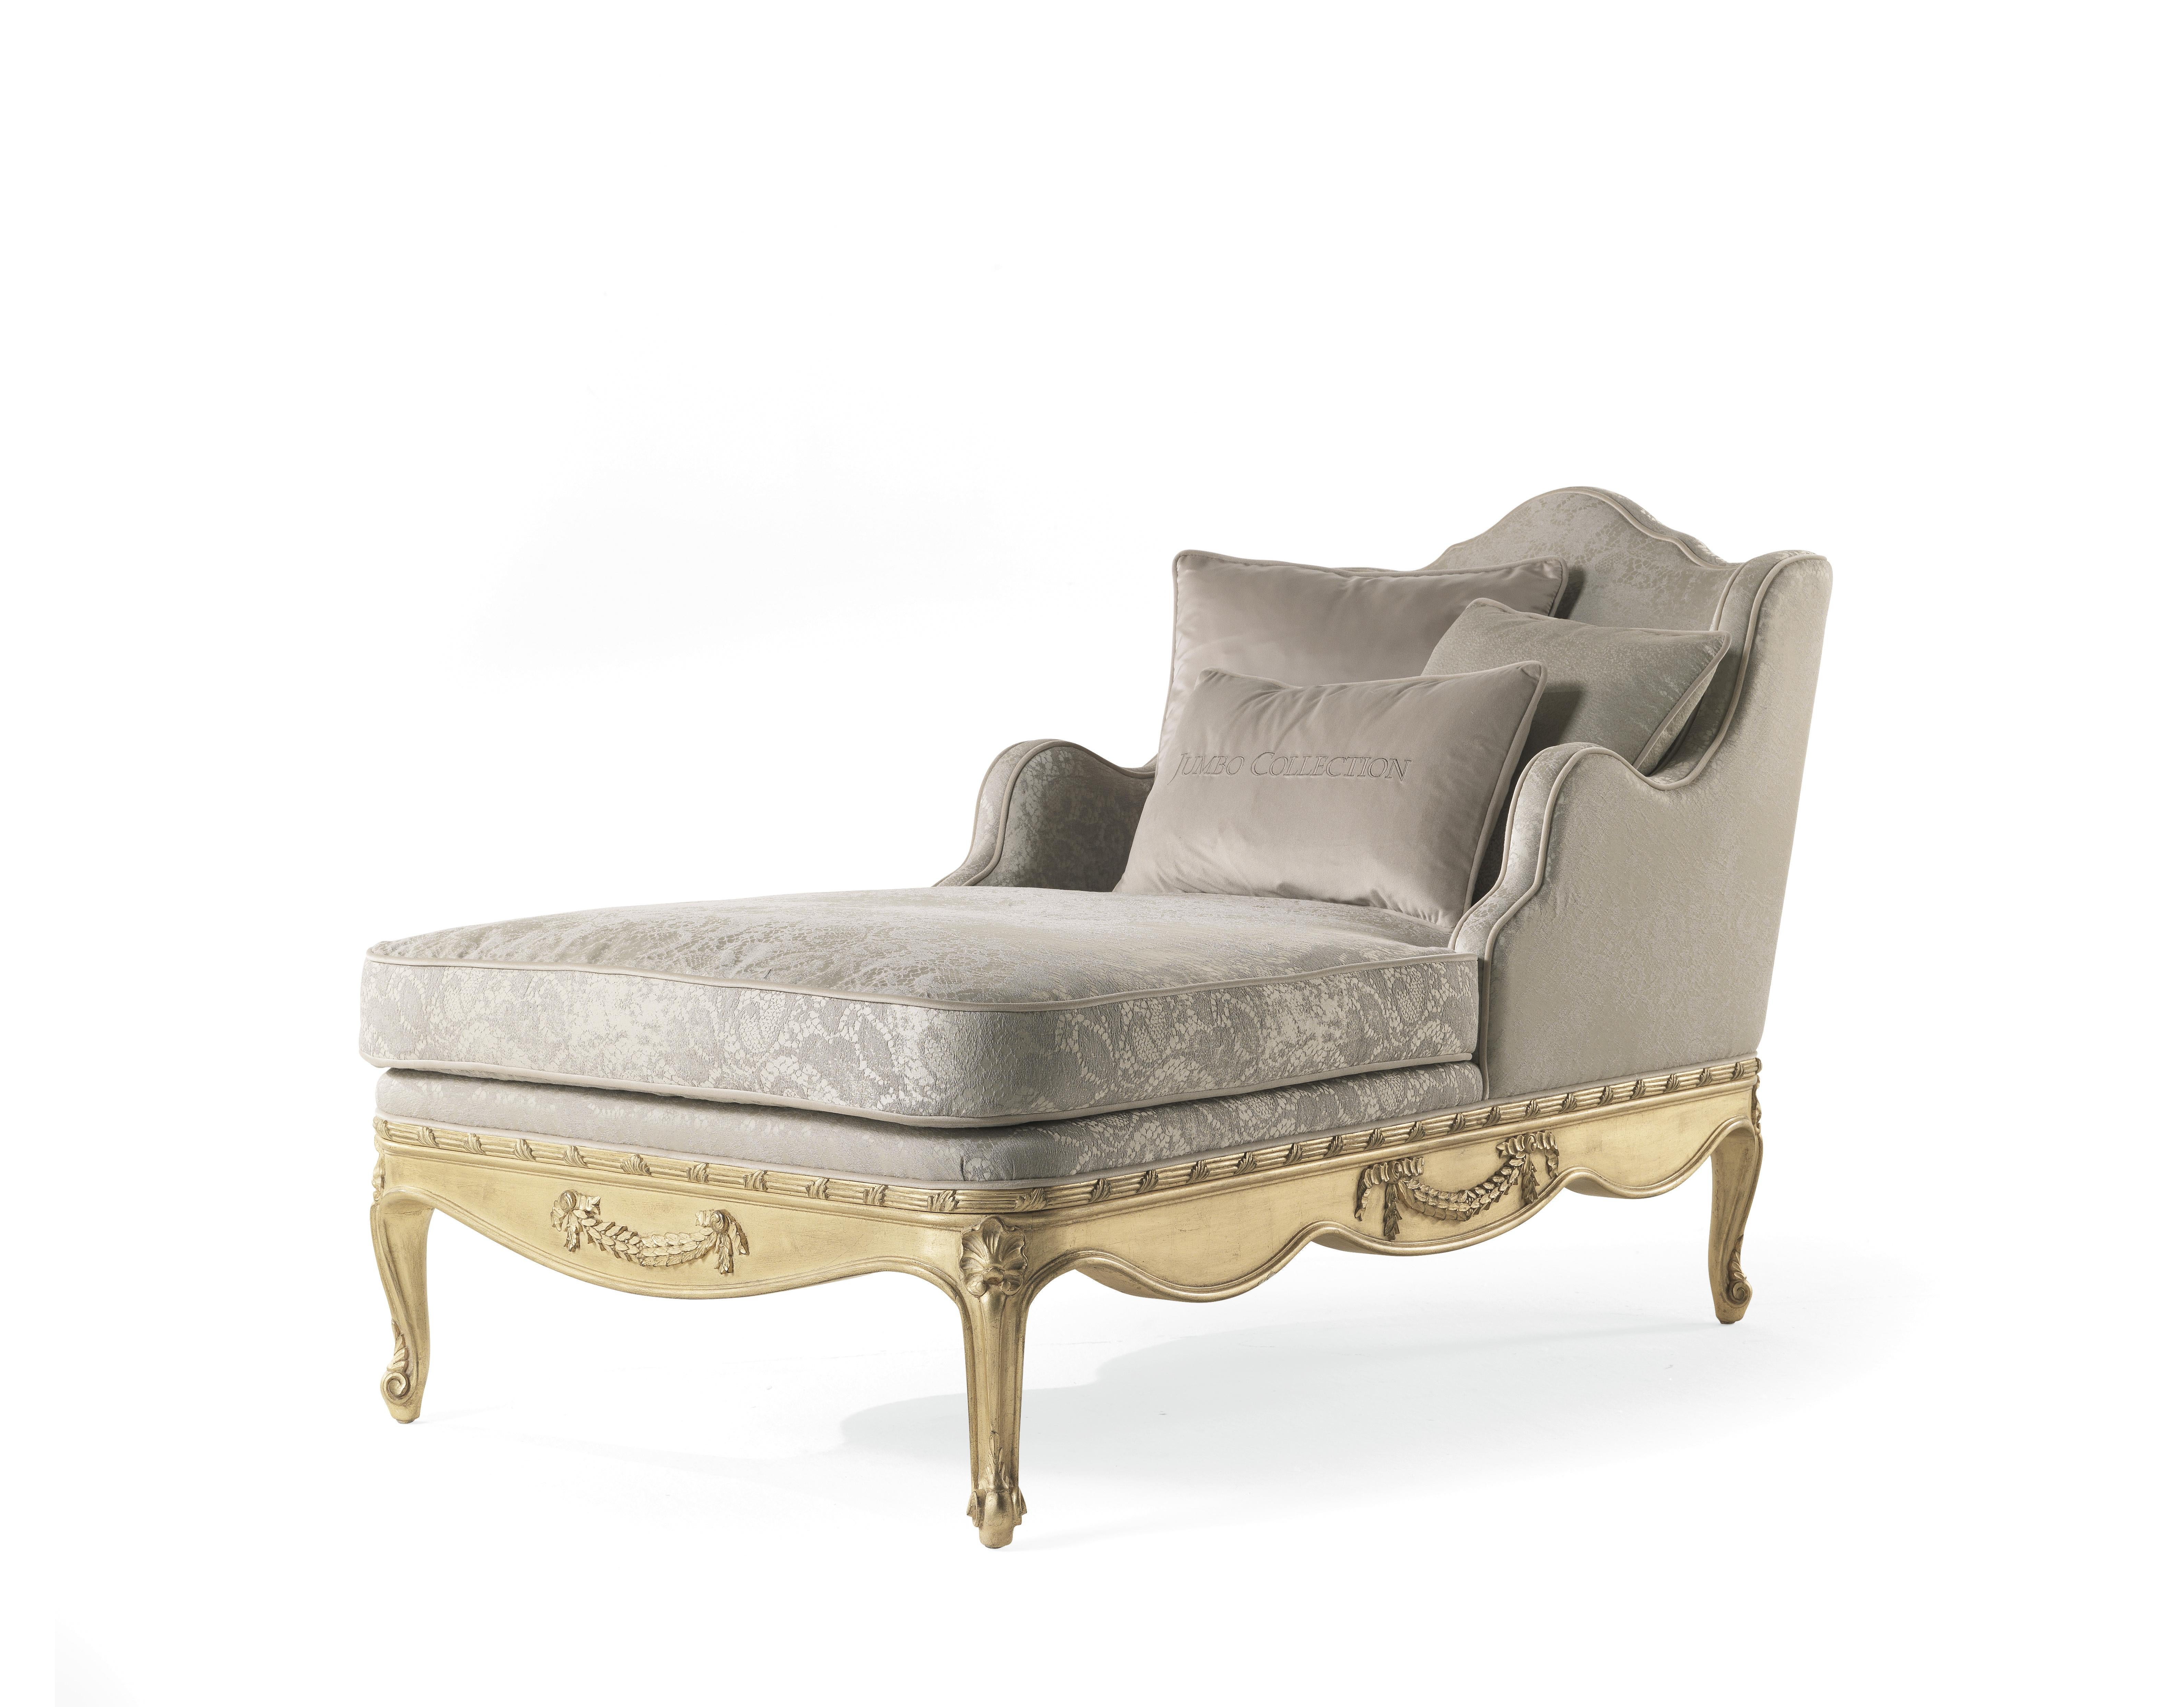 Sensual and welcoming, the Verveine dormeuse embellishes the relax area with its French flavour. In addition to the base in hand-carved wood with patinated antique gold finishing, Verveine is characterized by the complex wave-style upholstery of the